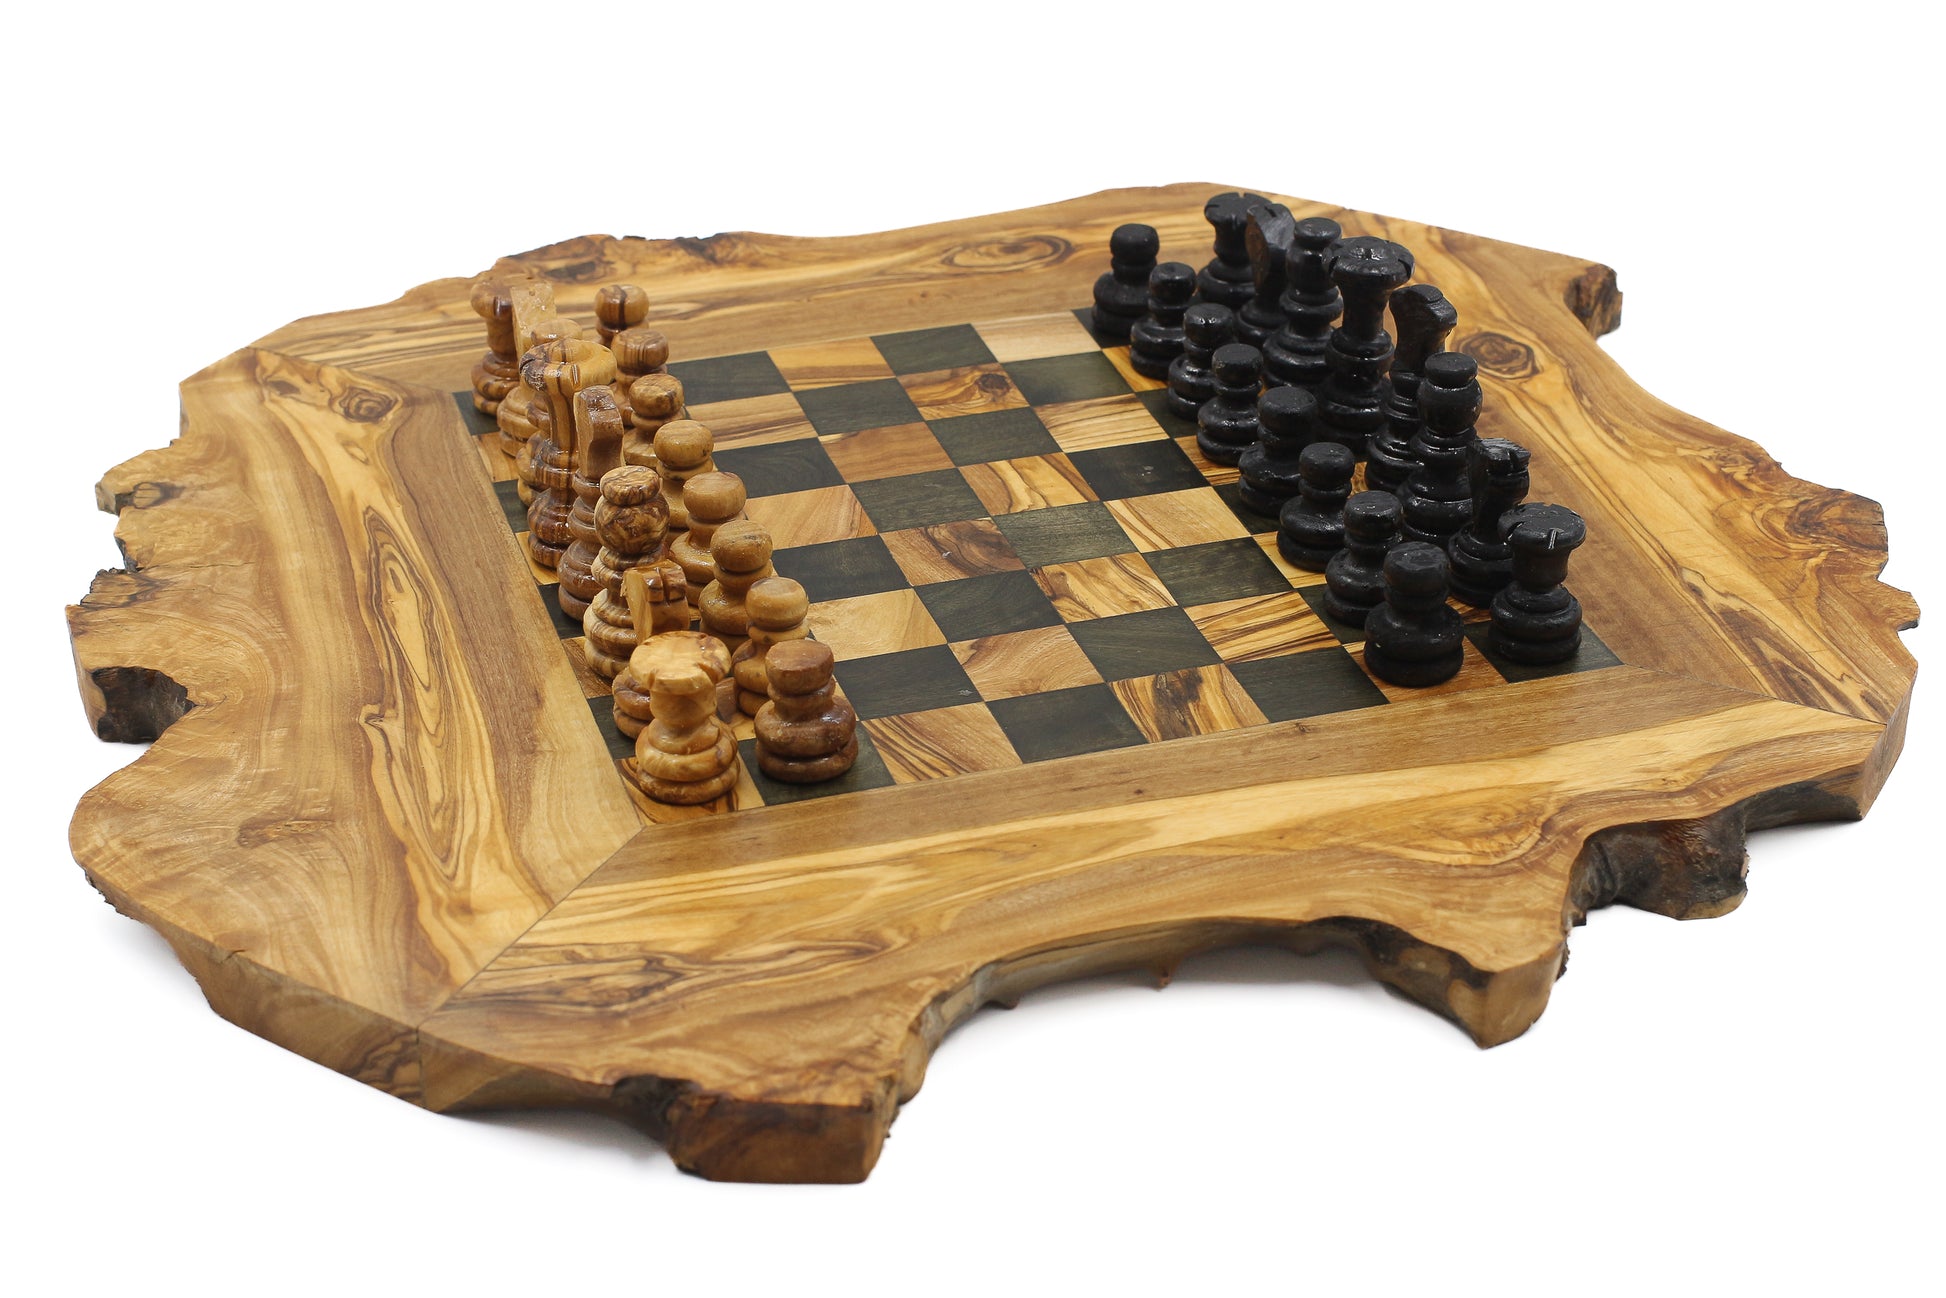 Artisan-made olive wood chess set with a beautifully crafted board and matching pieces